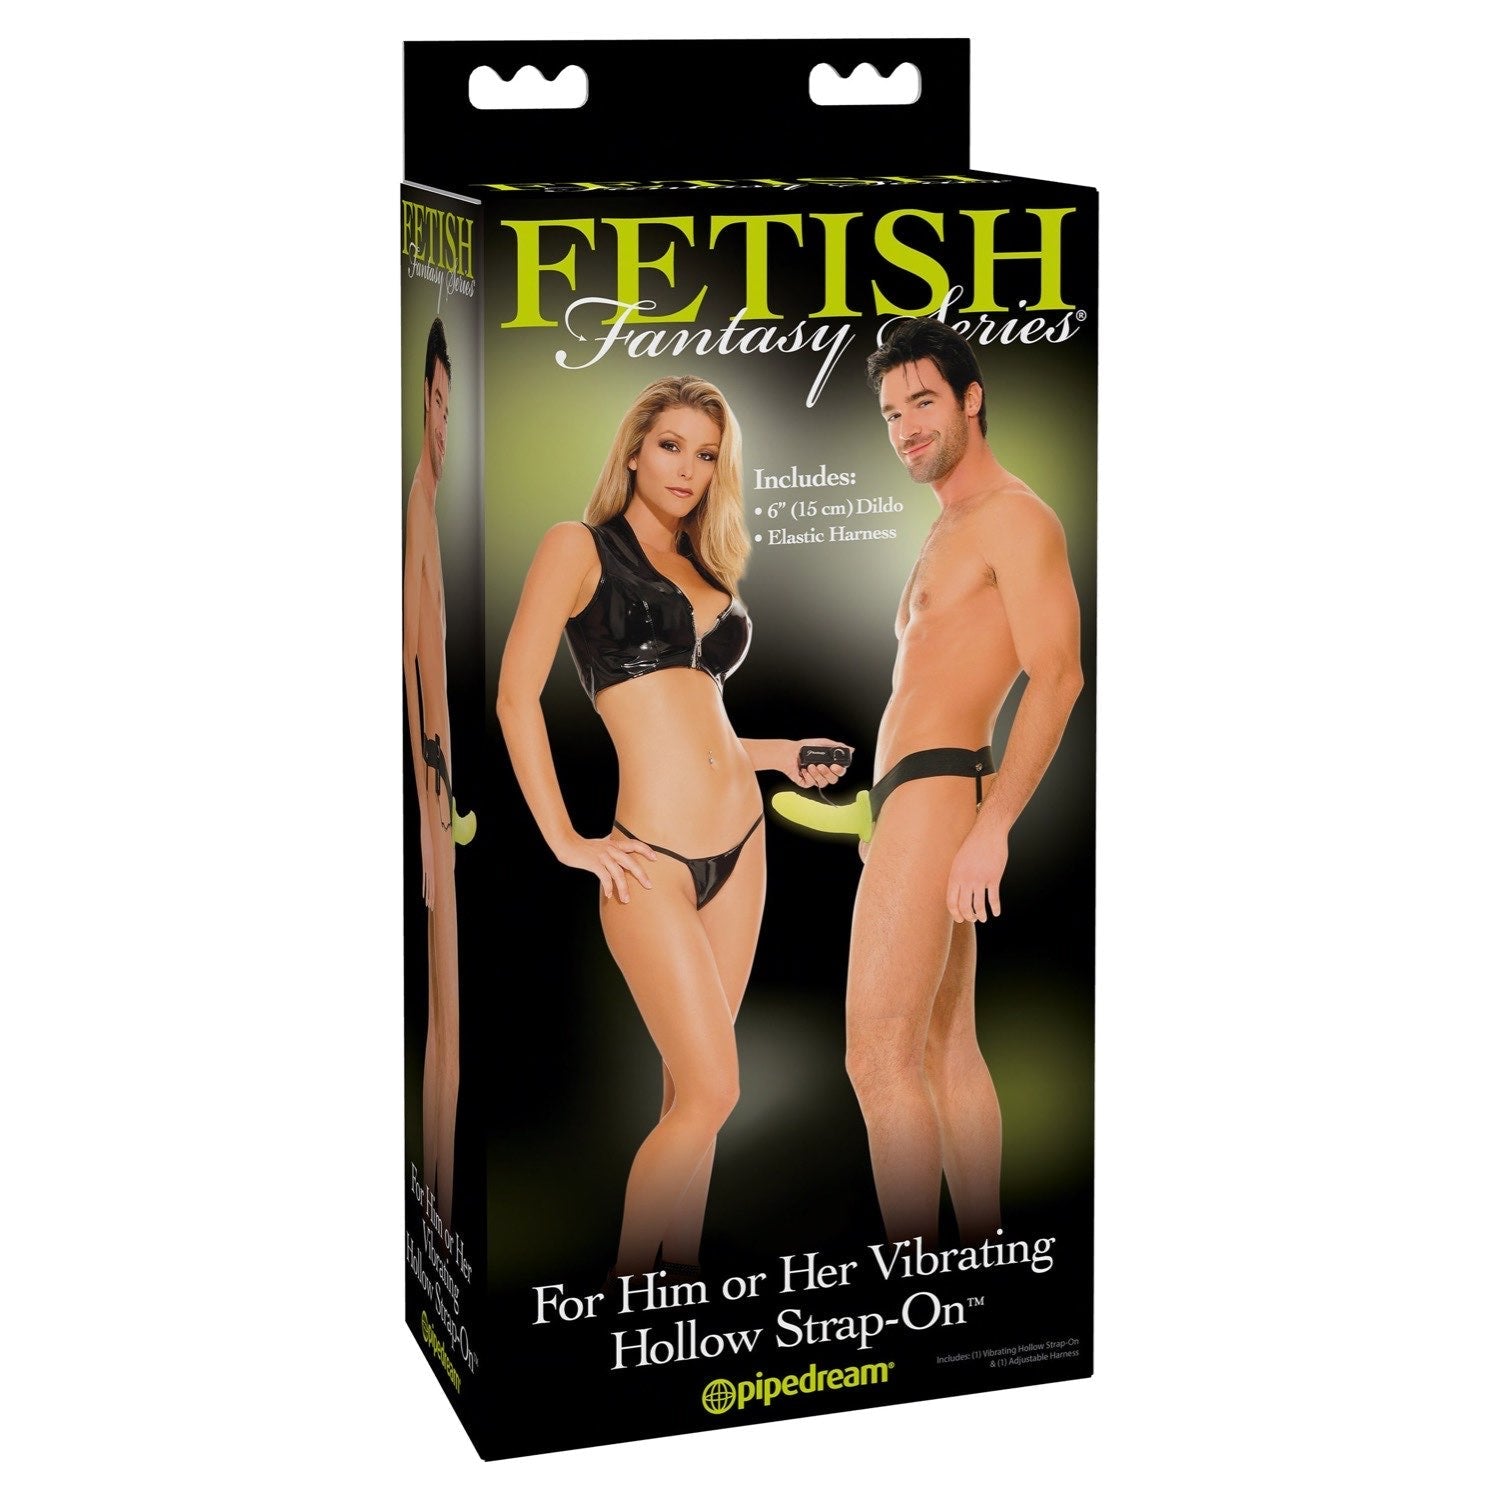 Fetish Fantasy Series Vibrating Hollow Strap-on - Glow in Dark 6&quot; Vibrating Strap-On for Her &amp; Him by Pipedream